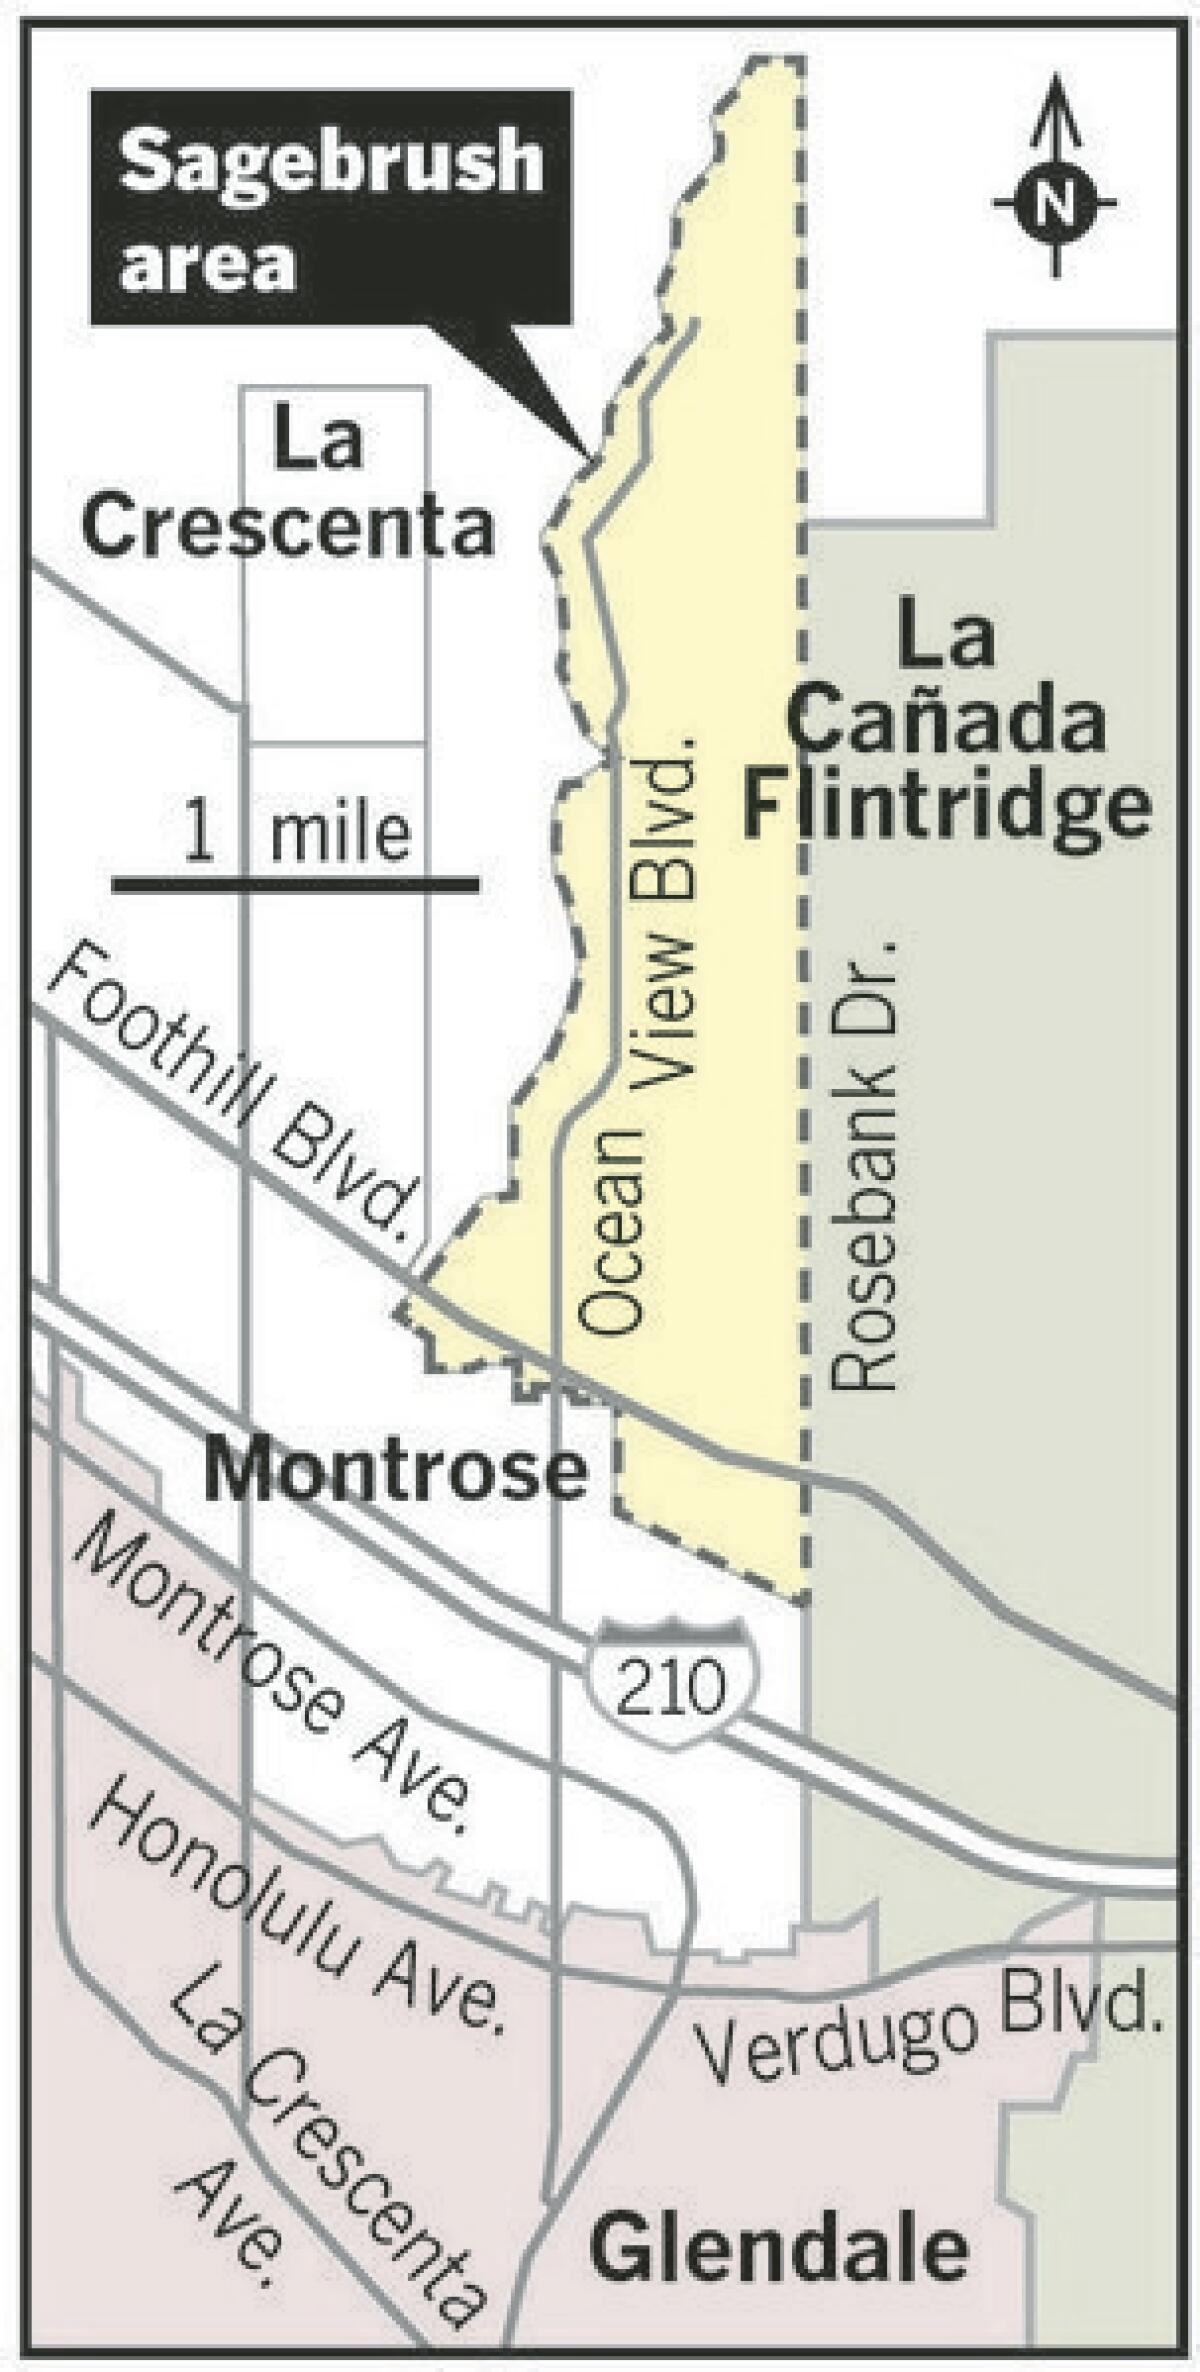 The following illustration shows the "Sagebrush" region, which falls in Glendale UnifiedÃ‚Â¿s boundaries. Parents who live in the area have fought for decades for the opportunity to enroll their children in La CaÃƒÂ±ada schools. A group of citizens recently formed to initiate the process once again.